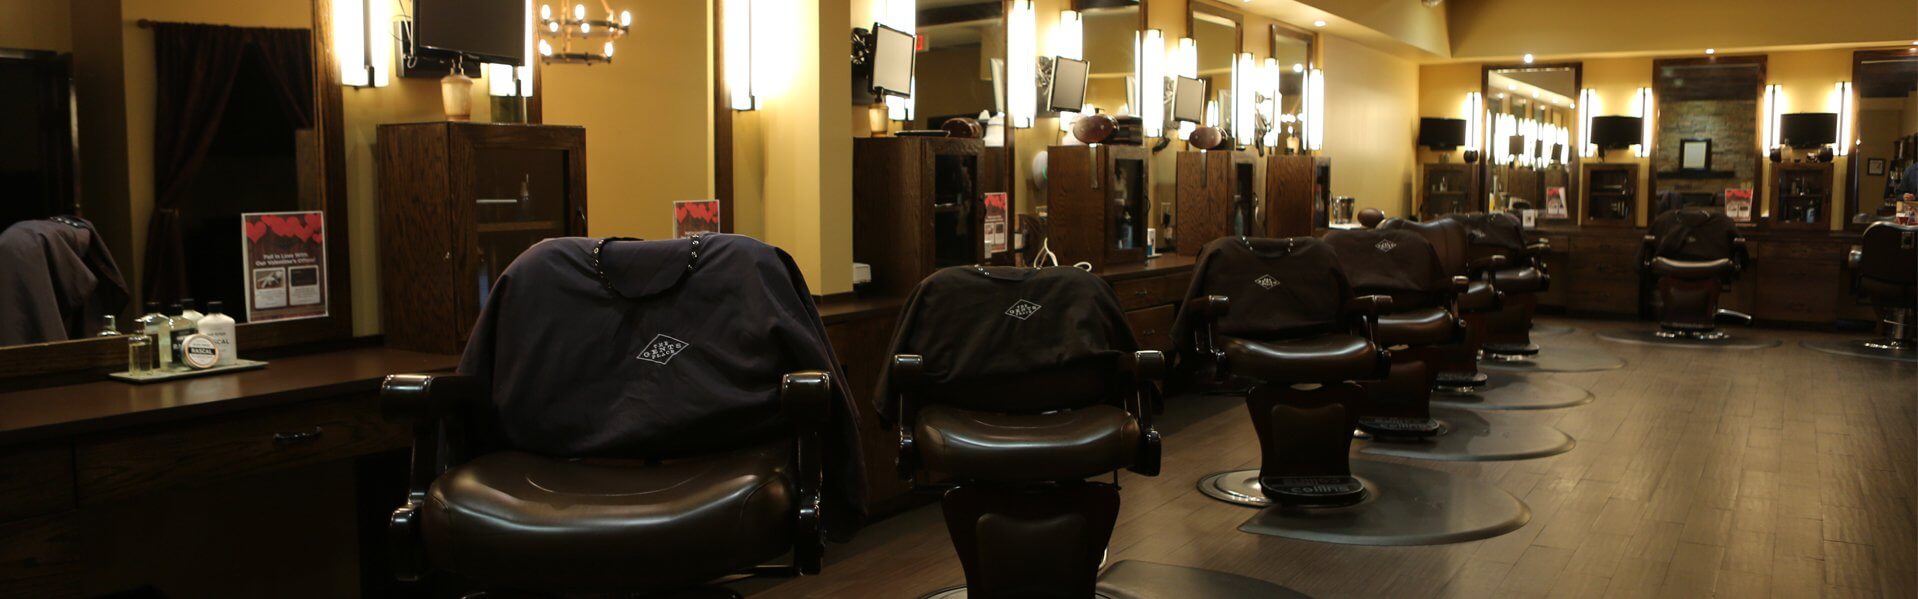 The Gents Place - Mens Haircuts Near Me and Barber Shop in Bentonville AR